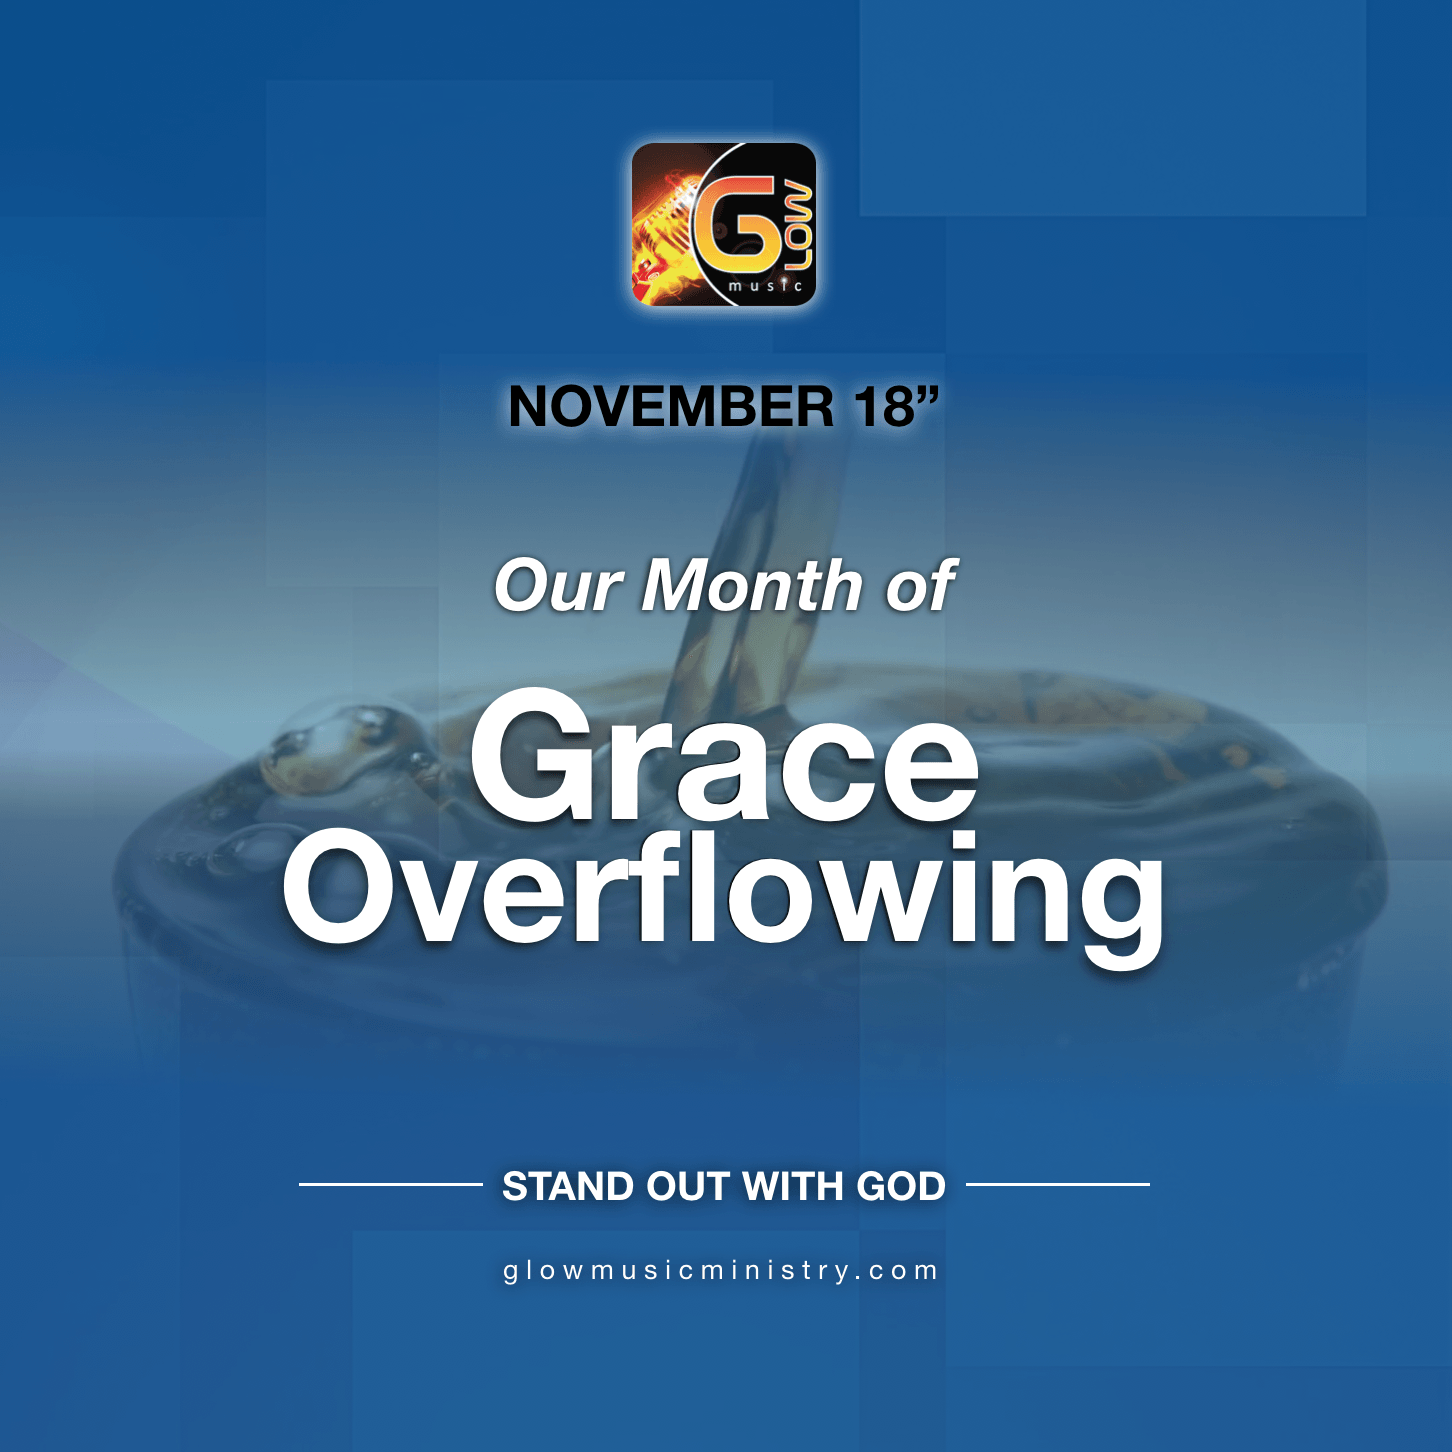 Glow Music Ministry Month of Grace Overflowing in November 2018